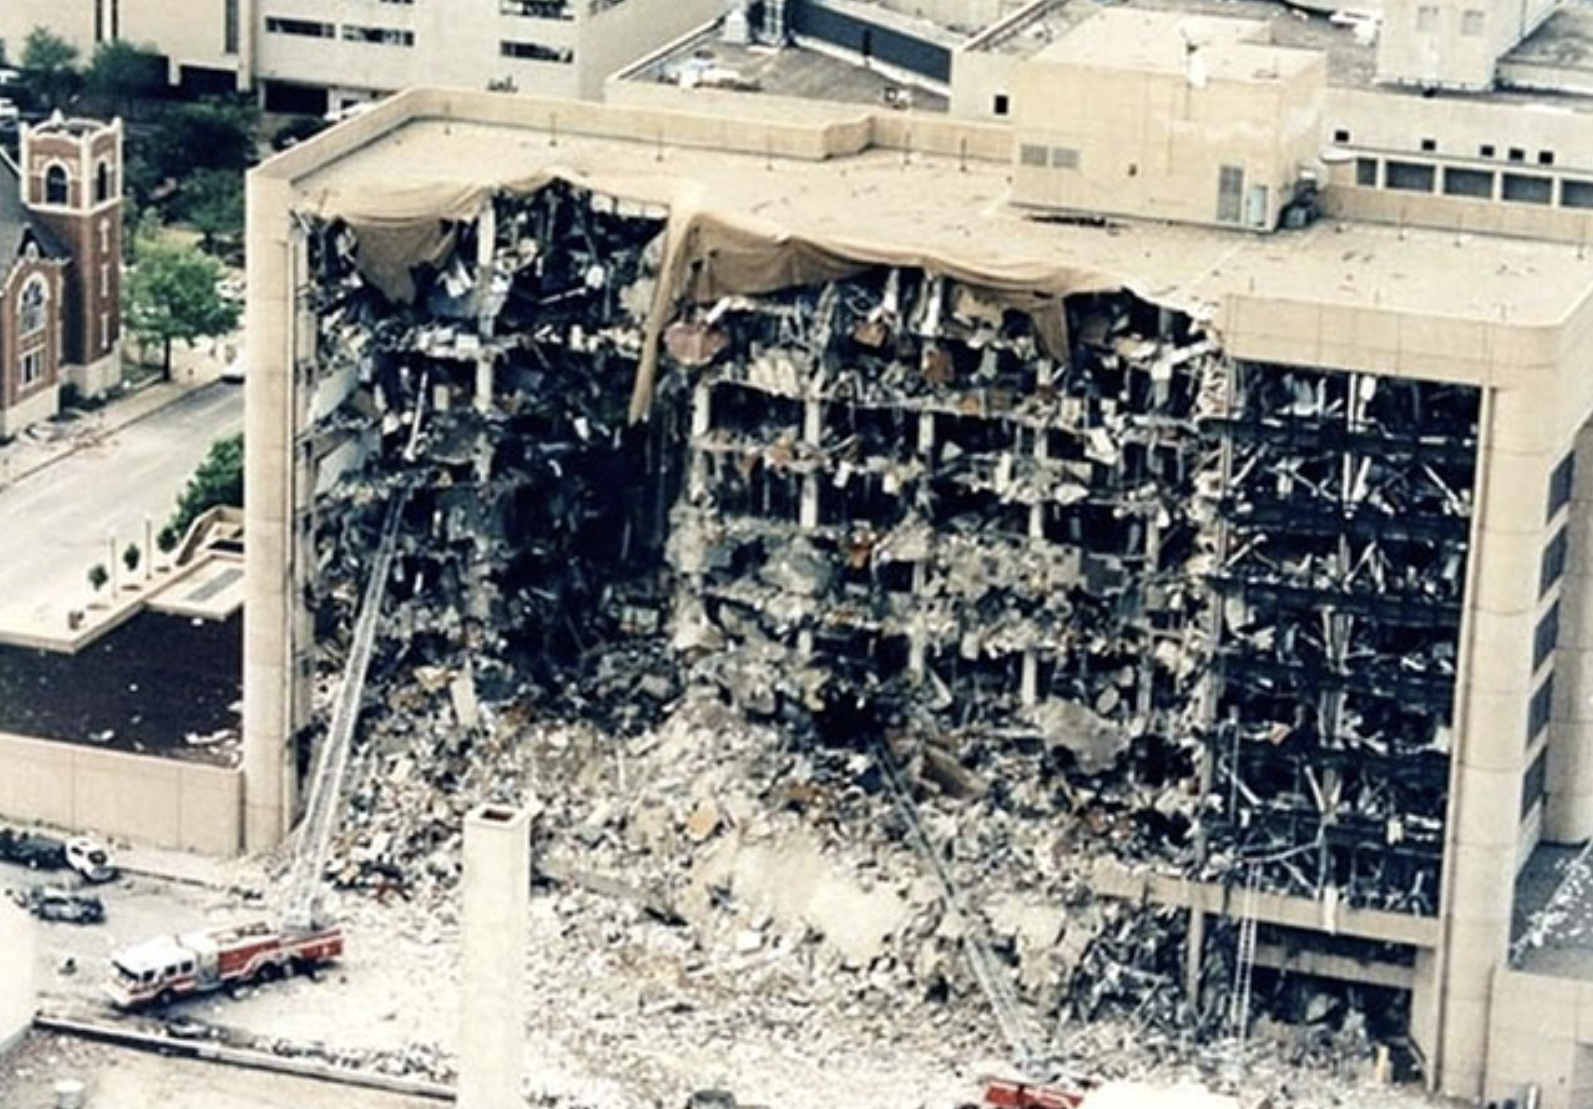 On April 19, 1995, the Alfred P. Murrah Federal Building in Oklahoma City, Oklahoma came crashing down after a truck bomb was detonated in front of the office complex. 168 people were killed and 680 were injured in the blast. Tim McVeigh was ultimately convicted in association with the explosion and was executed in 2001. 